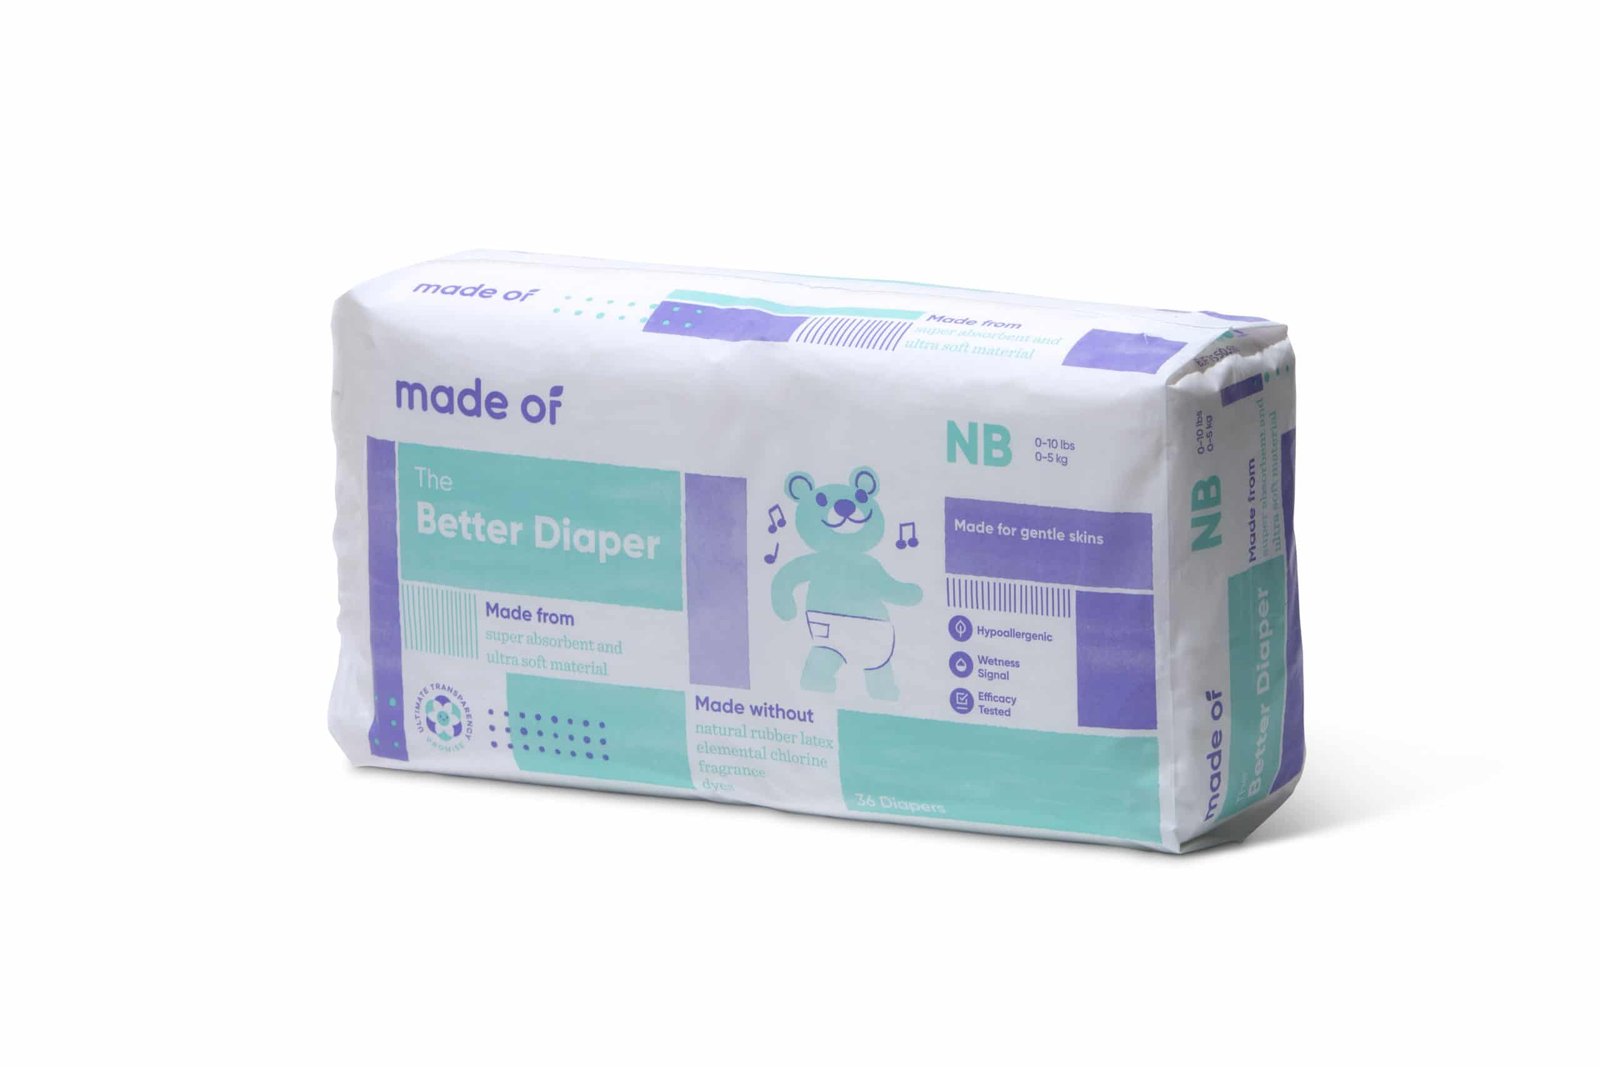 MO-Diapers-NB-alt-01-8186-sillo-copy-scaled-1.jpg